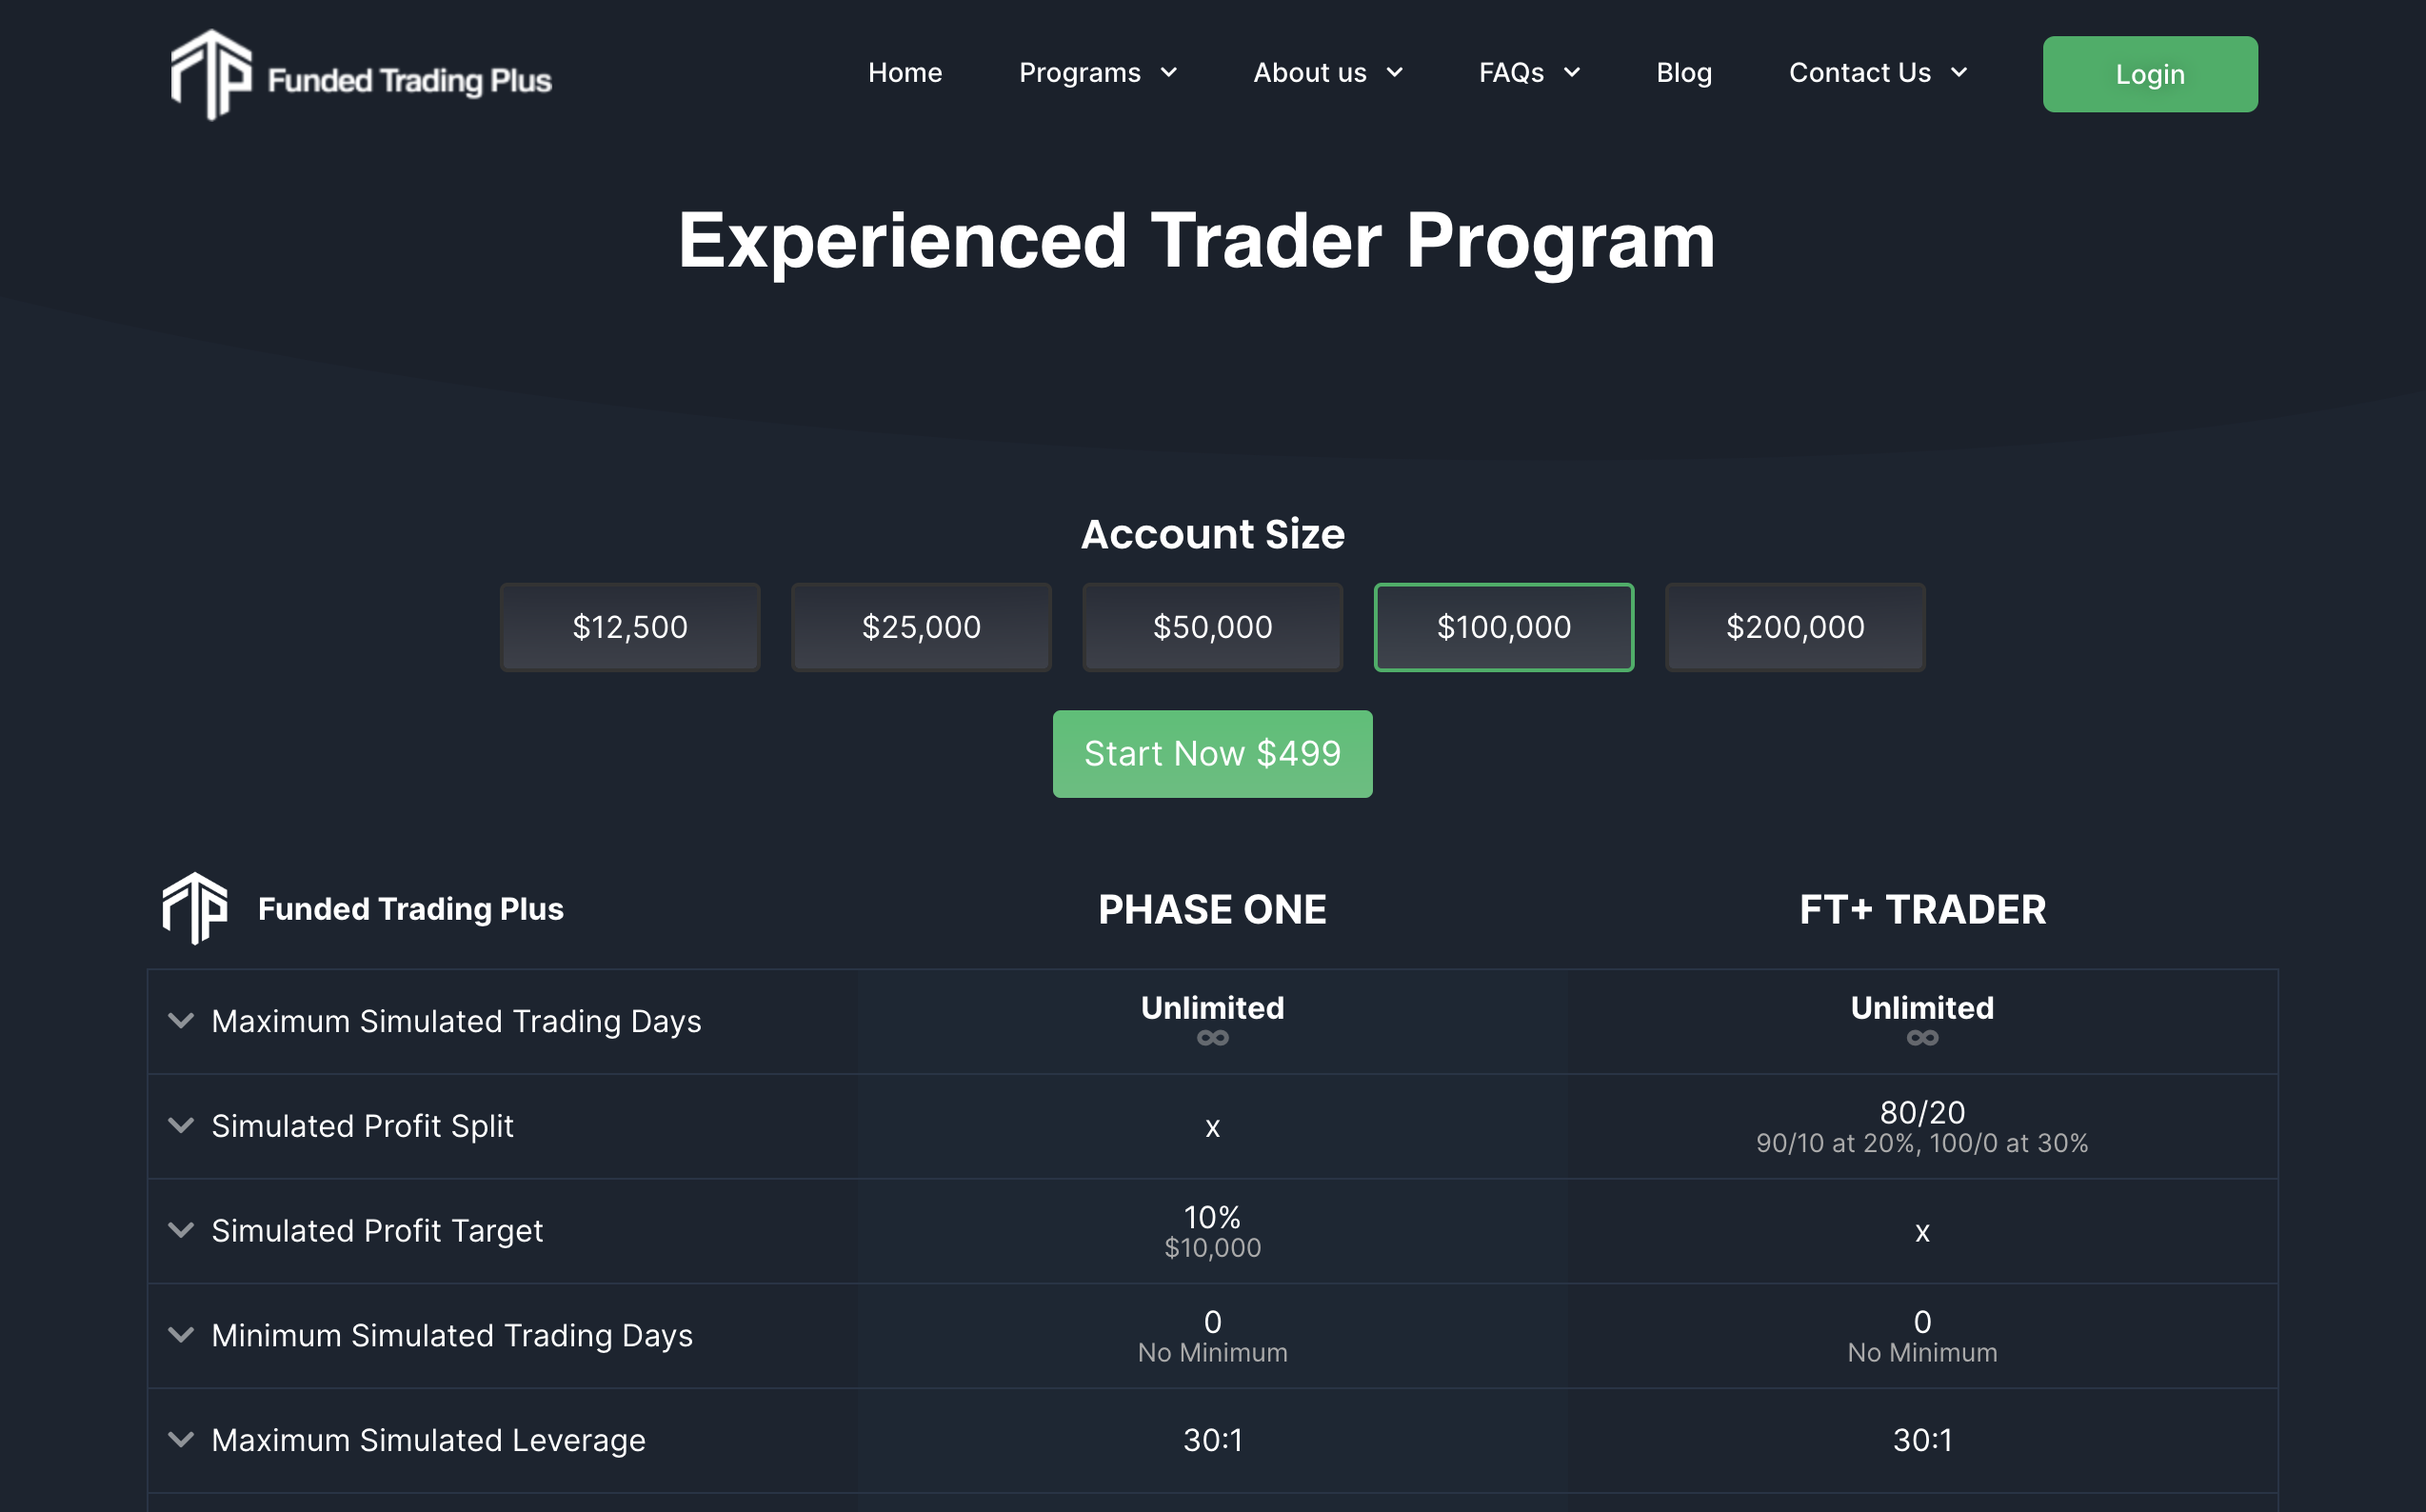 My Plan for Swing Trading Funded Trading Plus’ $50k Challenge